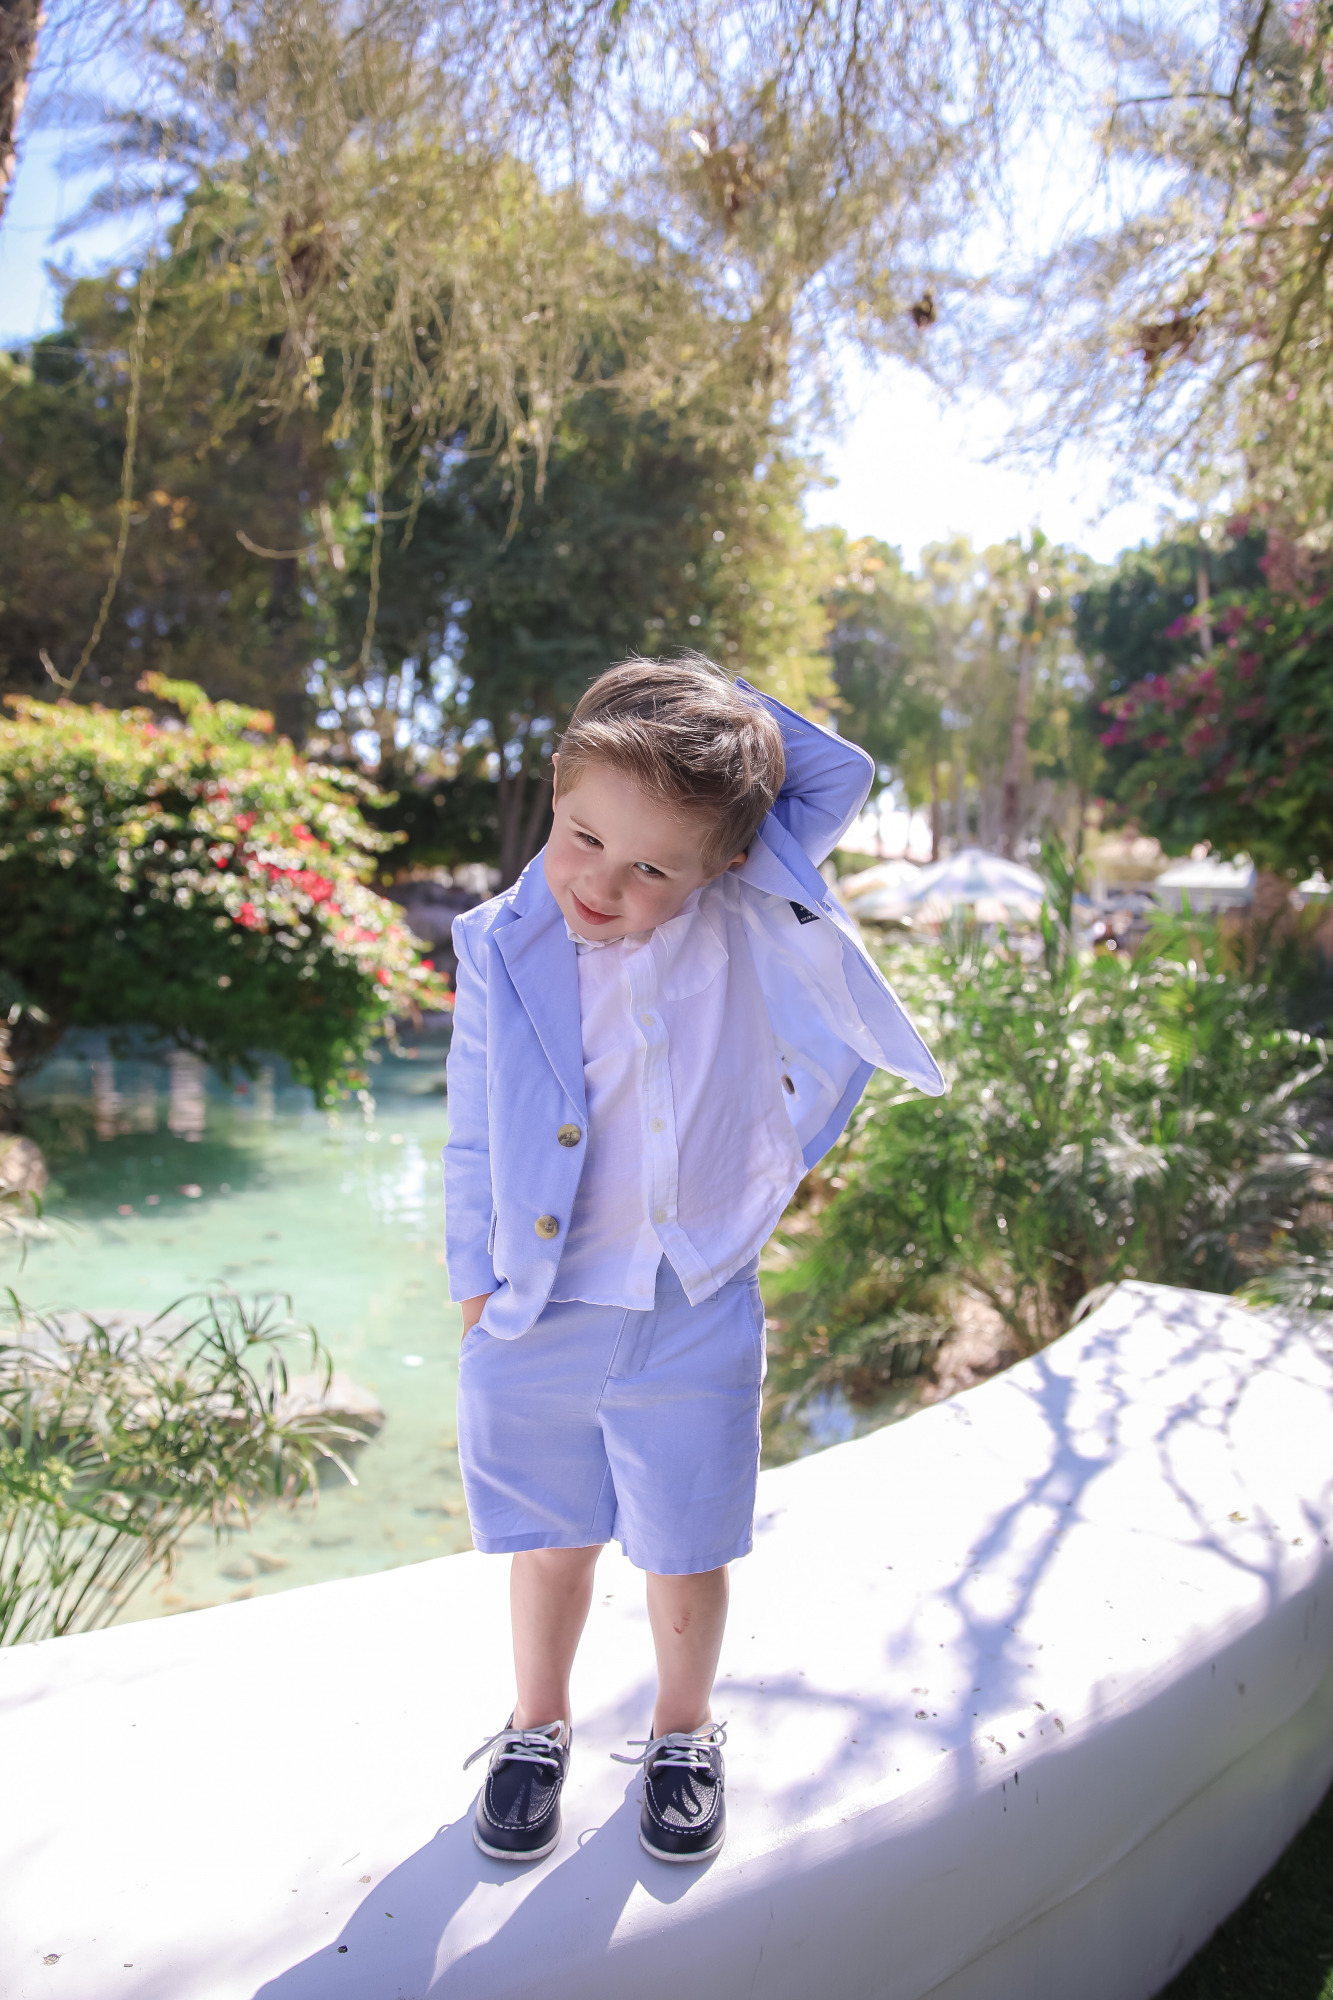 janie and jack easter kids outfits 2021, kids easter outfit ideas toddler, toddler boy seersucker suit |Spring Outfit Ideas for Kids by popular US fashion blog, The Sweetest Thing: image of a young boy standing outside next to a landscaped pond and wearing a Seersucker Blazer, Seersucker Shorts, White Button-down, and Leather Boat Shoes.